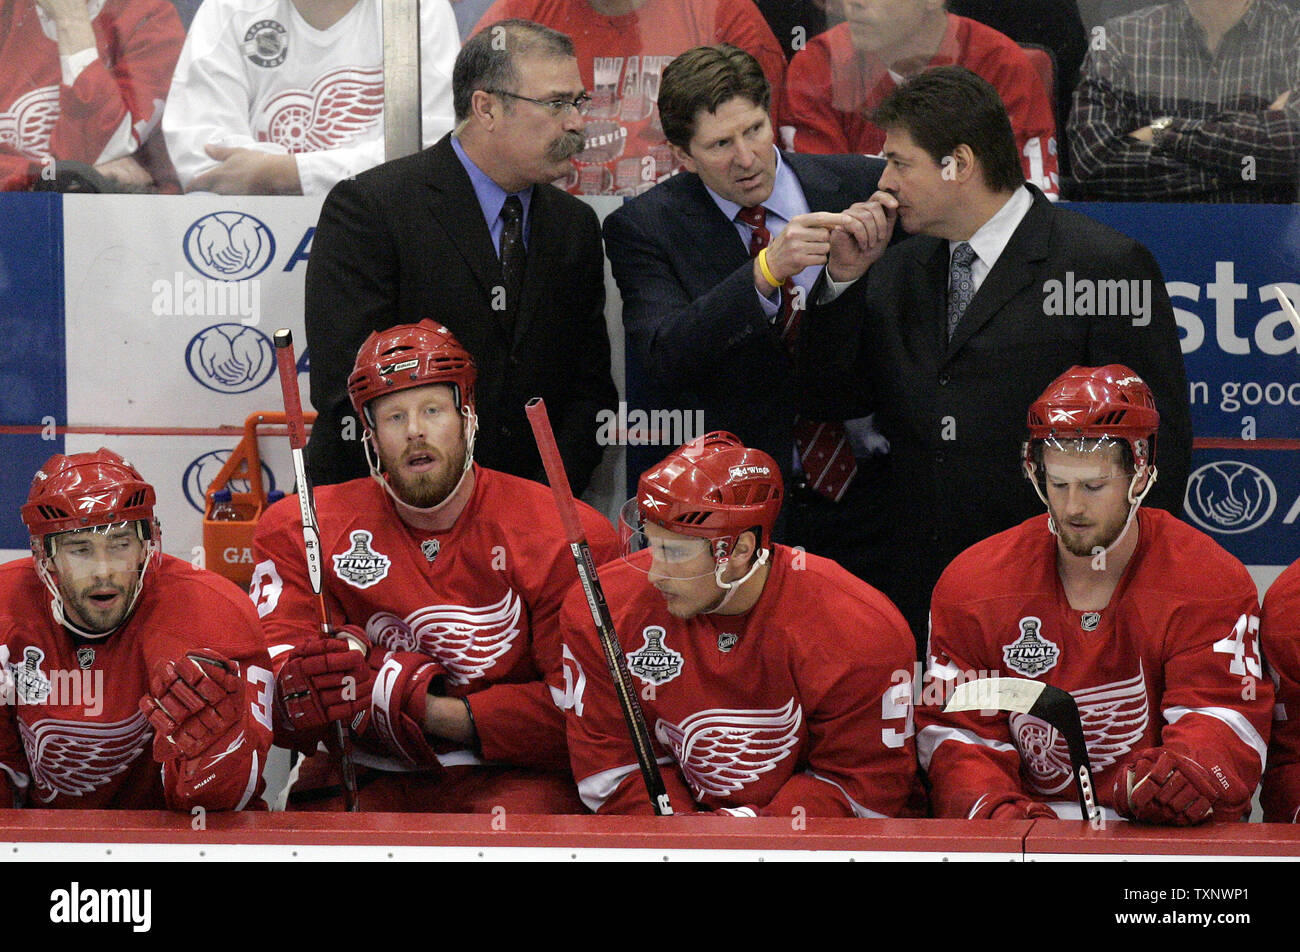 Detroit Red Wings head coach Mike Babcock, center, with assistant coaches Paul MacLean, left, and Brad McCrimmon, right, discuss power play strategy during the first period of game 5 of the 2009 Stanley Cup Final against the Pittsburgh Penguins at Joe Louis Arena in Detroit on June 6, 2009. (UPI Photo/Mark Cowan) Stock Photo